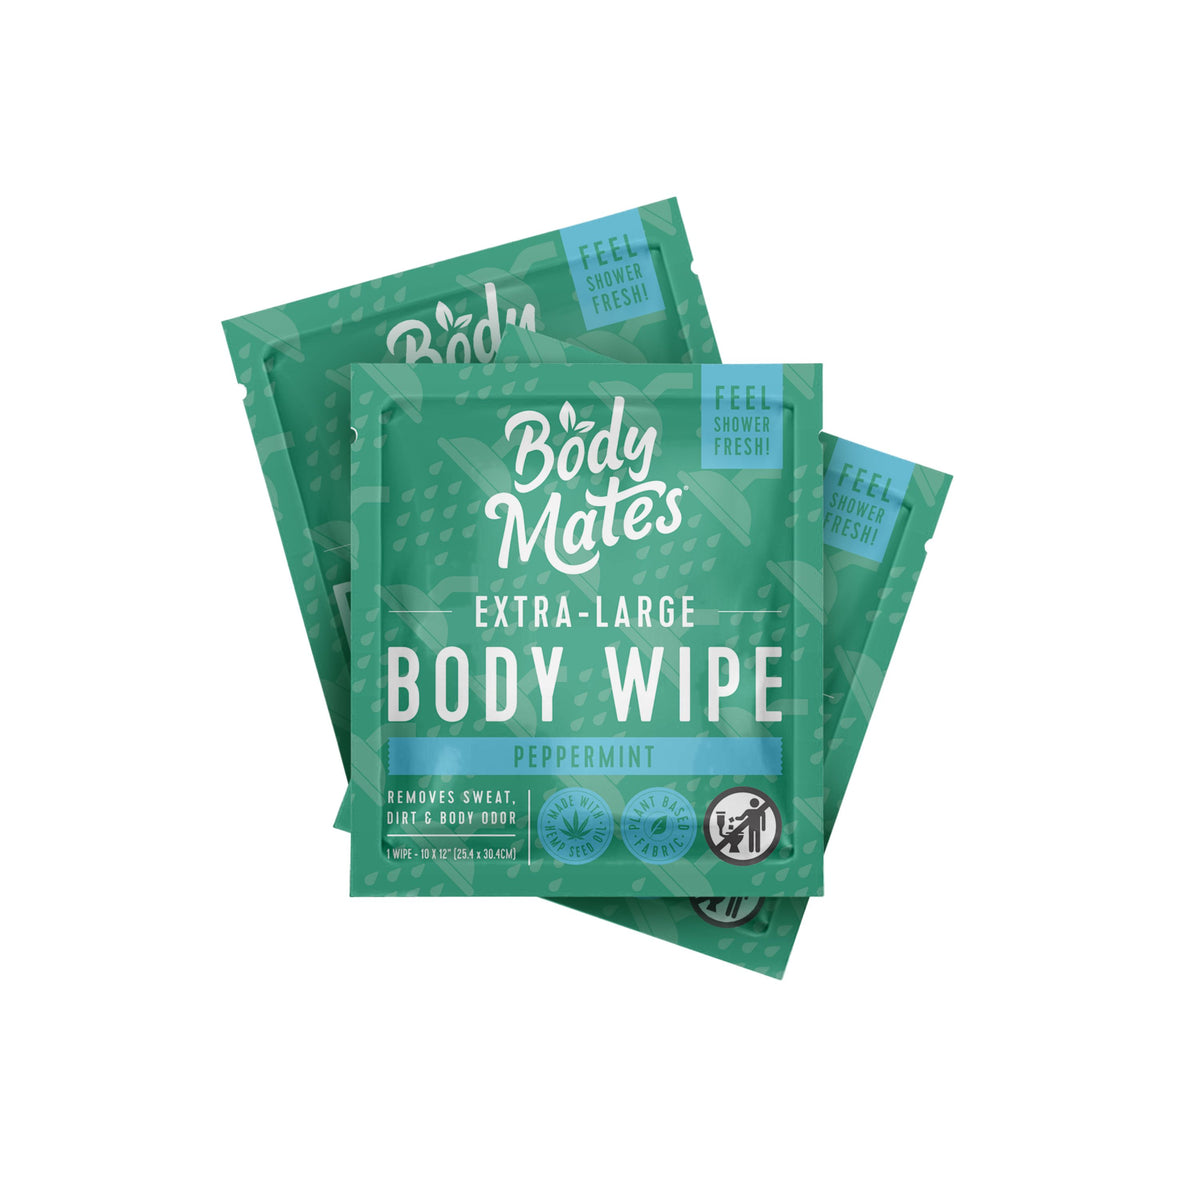 Body Mates: Shower Extra-Large Body Wipes, Portable Travel-Sized Individual Cleansing Wipes, 20 On-the-go Singles (Peppermint)